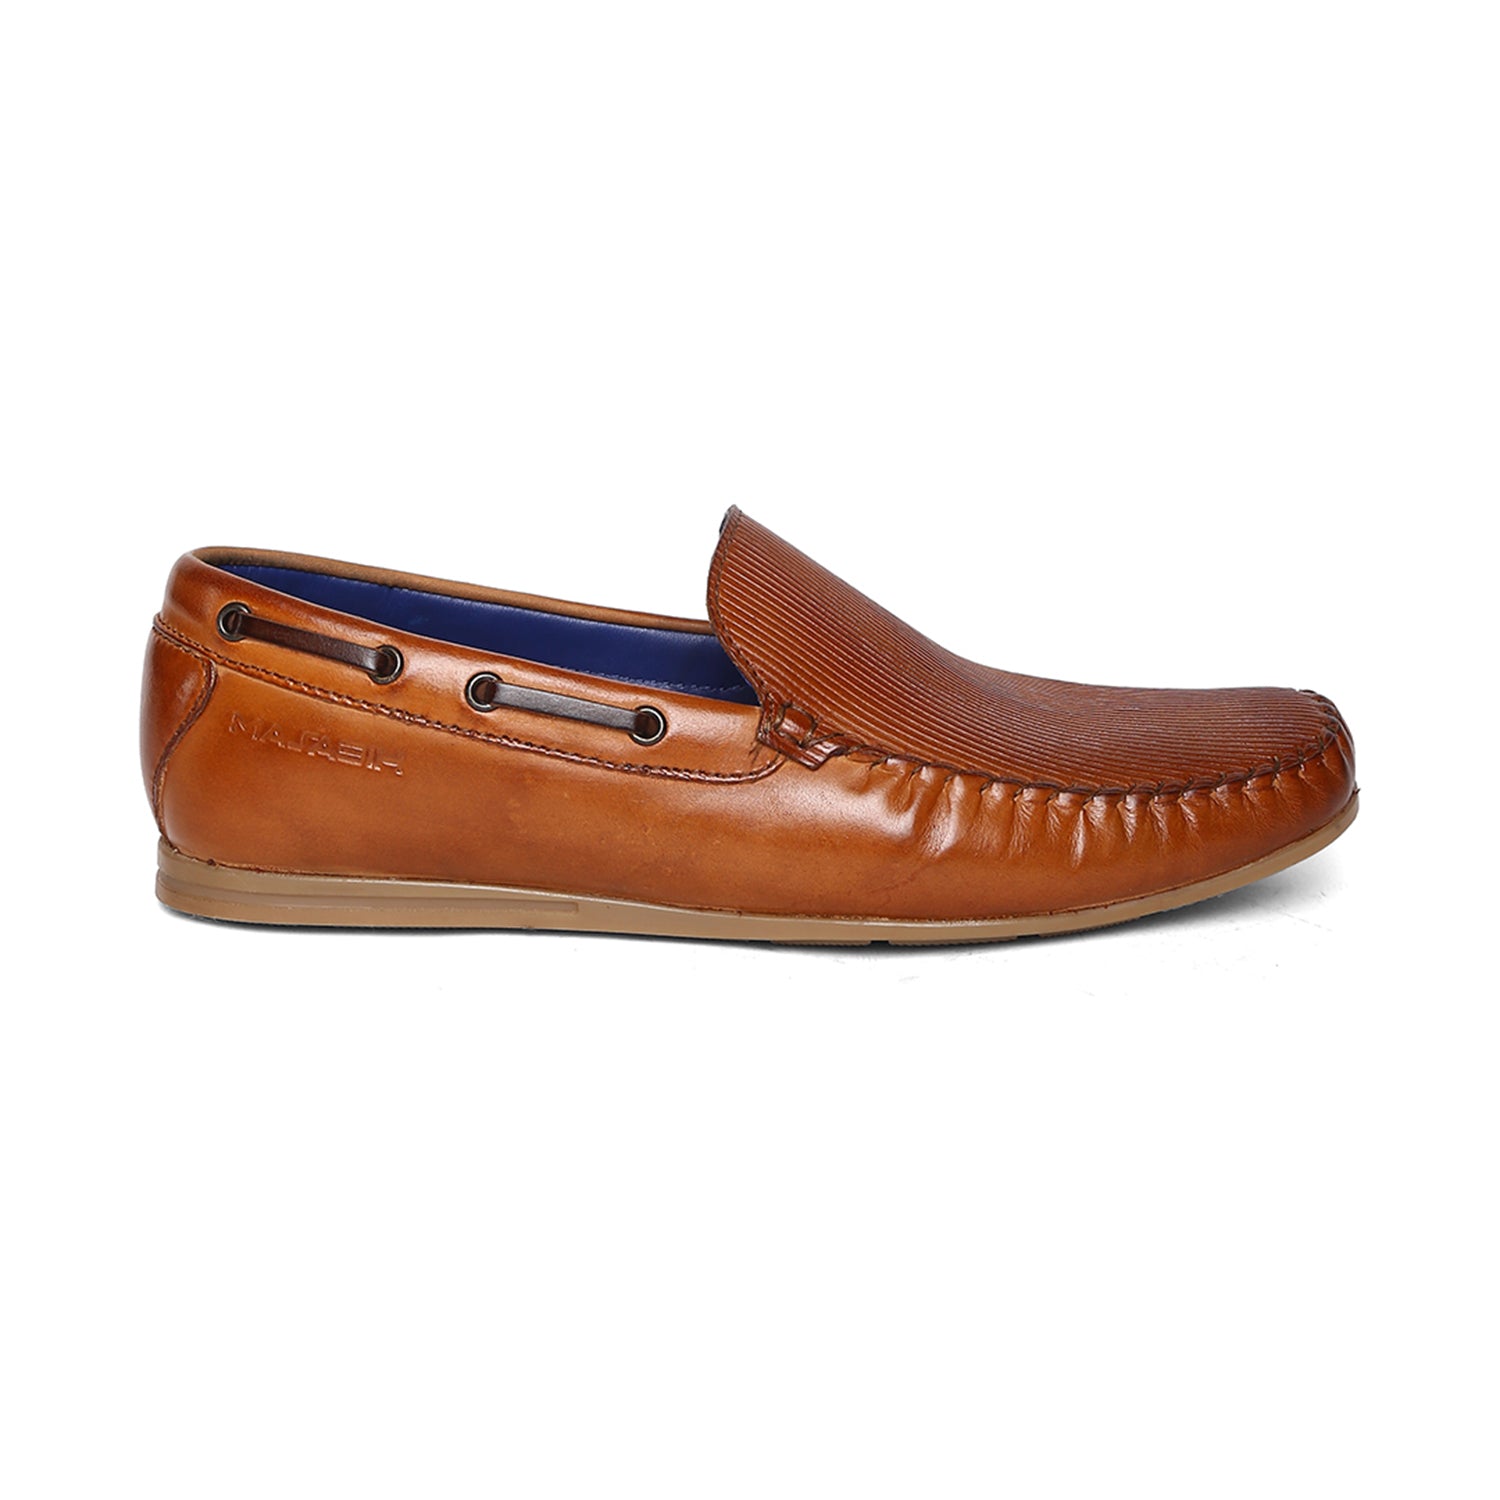 Masabih Genuine Leather Tan Mocassin Shoes with Flat Sole for Men